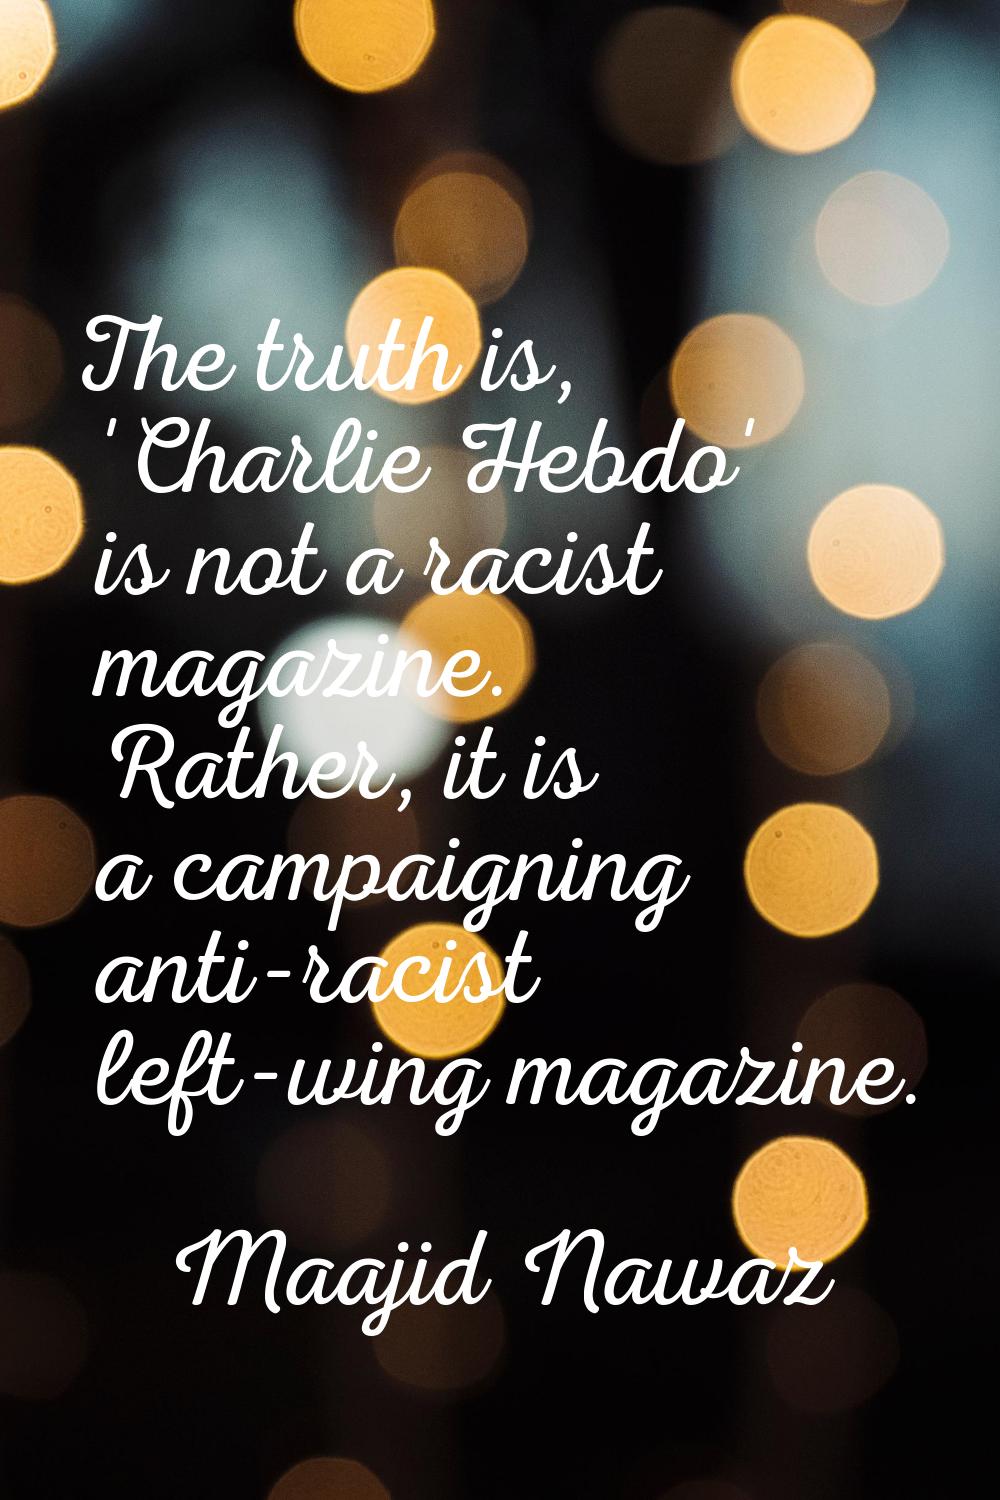 The truth is, 'Charlie Hebdo' is not a racist magazine. Rather, it is a campaigning anti-racist lef